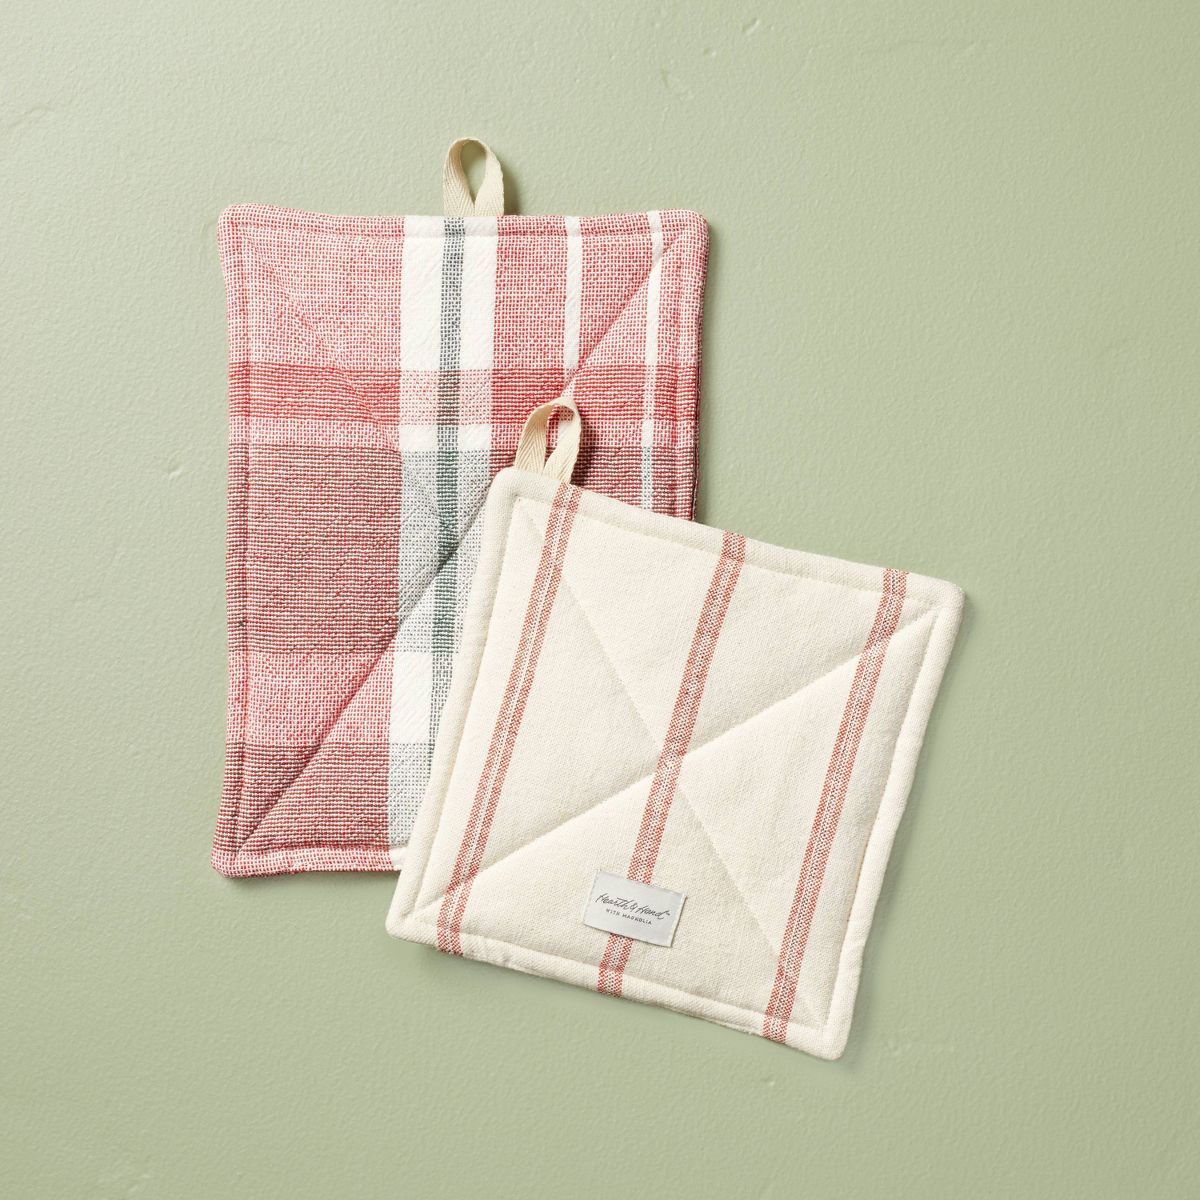 2pc Festive Plaid & Stripe Christmas Potholders Red/Green/Cream - Hearth & Hand™ with Magnolia | Target